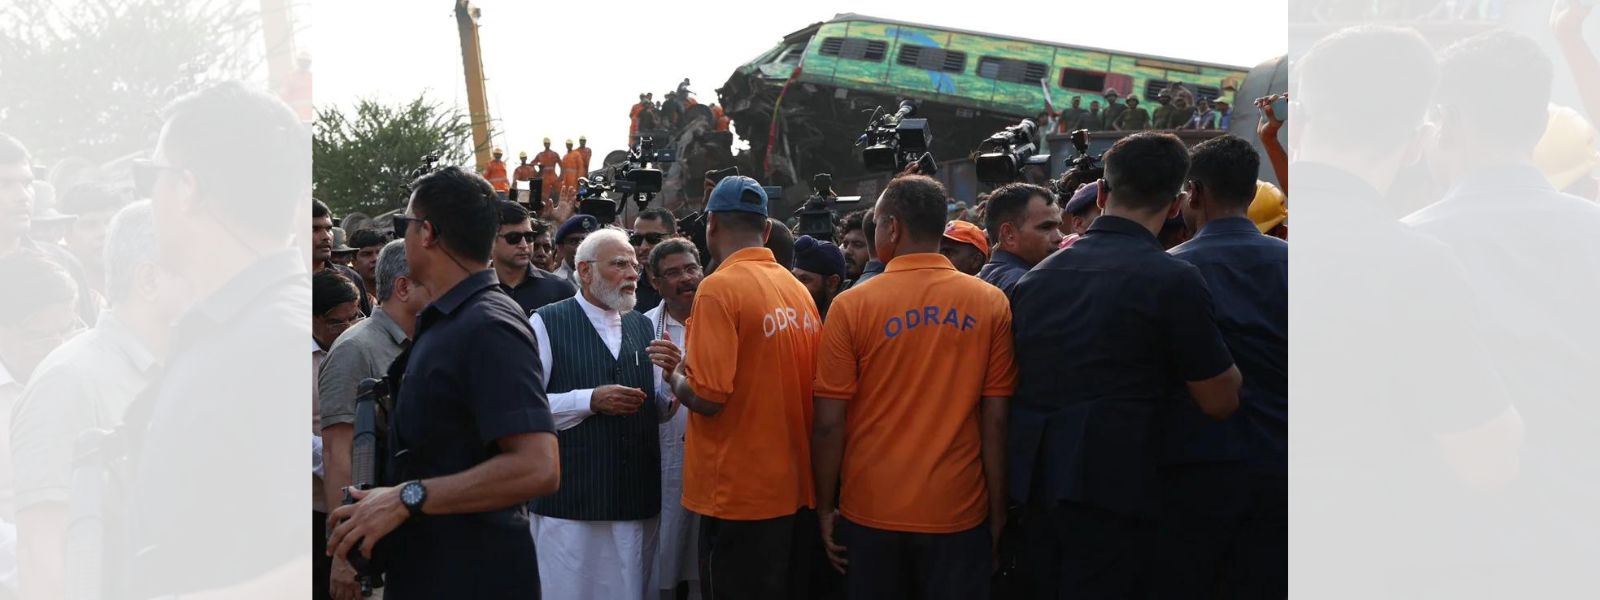 Odisha Triple-Train Disaster: Death toll now 288 with 1,175 injured